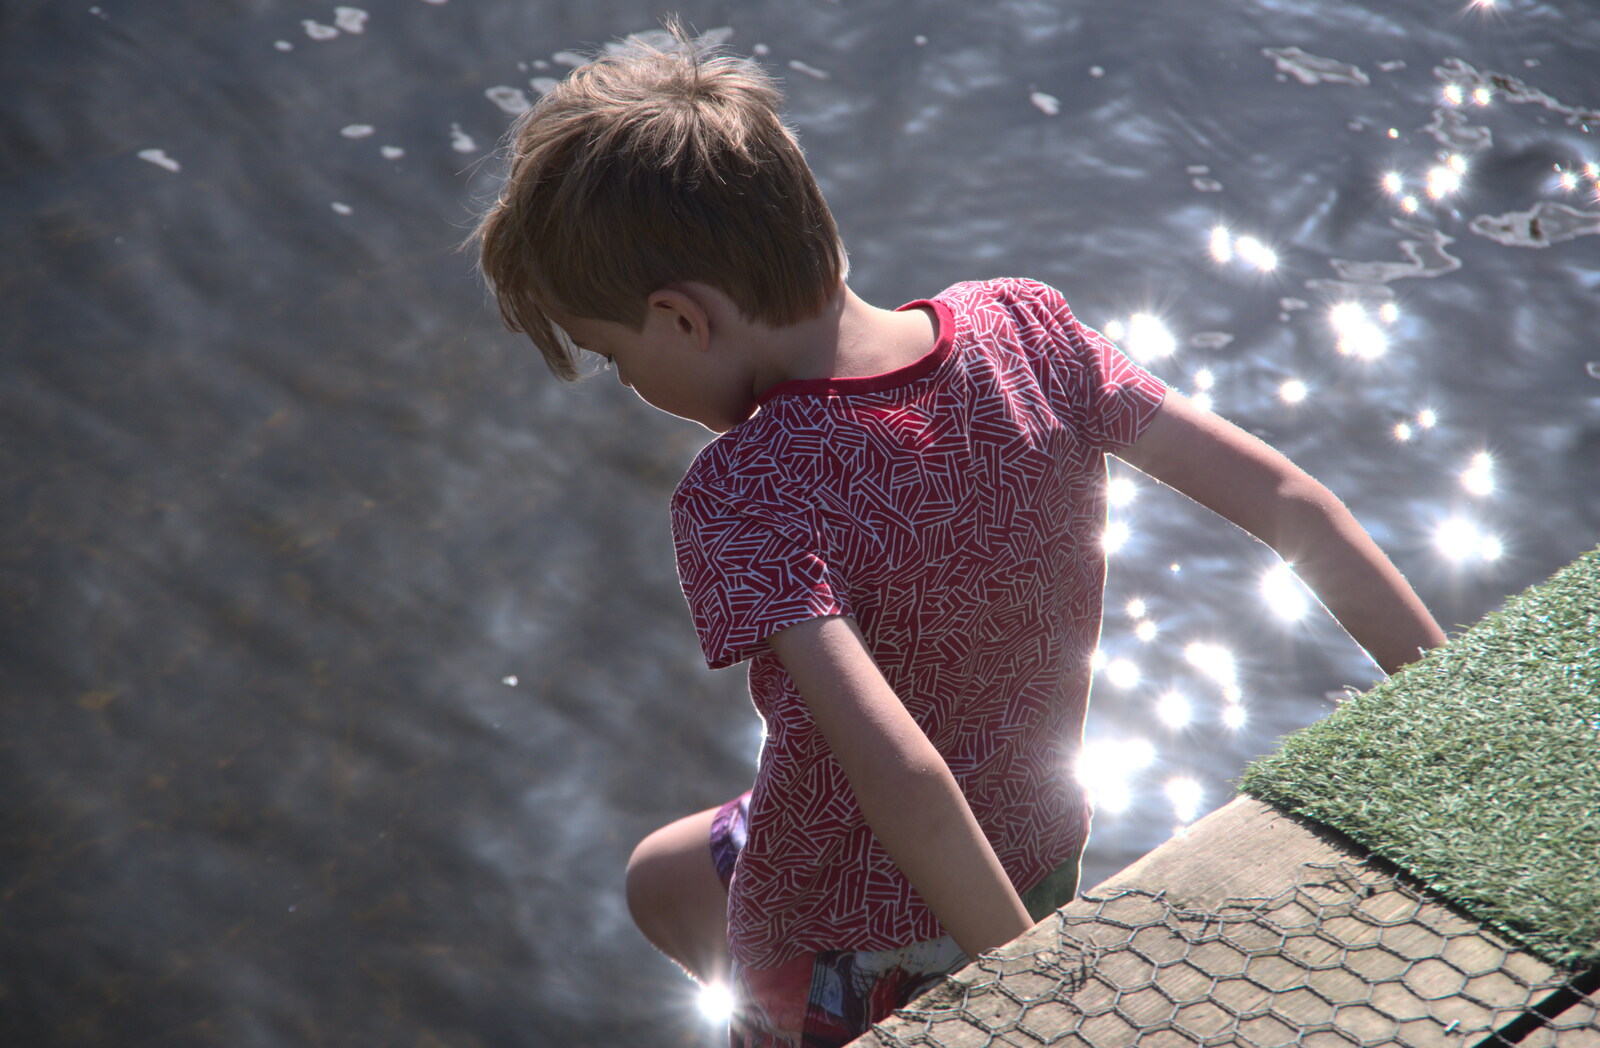 Harry by the sparkling river from Camping at Three Rivers, Geldeston, Norfolk - 5th September 2020